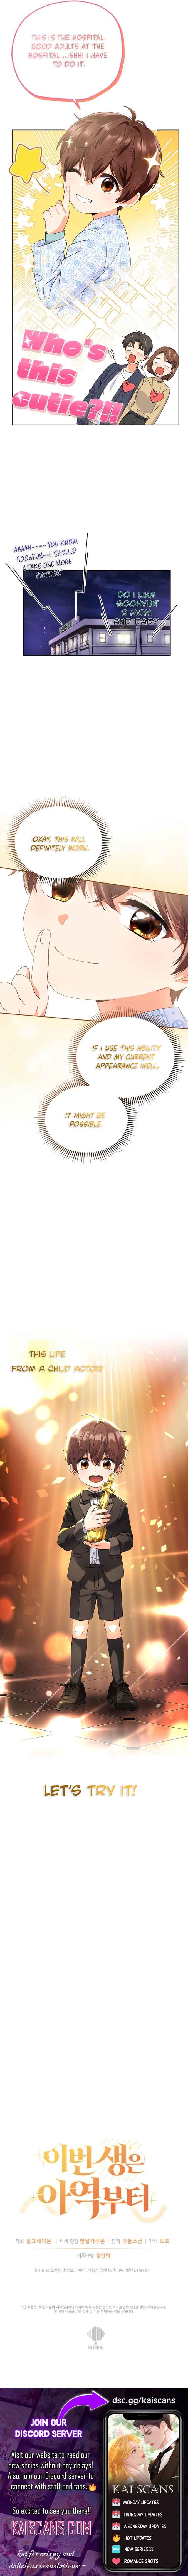 This Life Starts as a Child Actor chapter 1